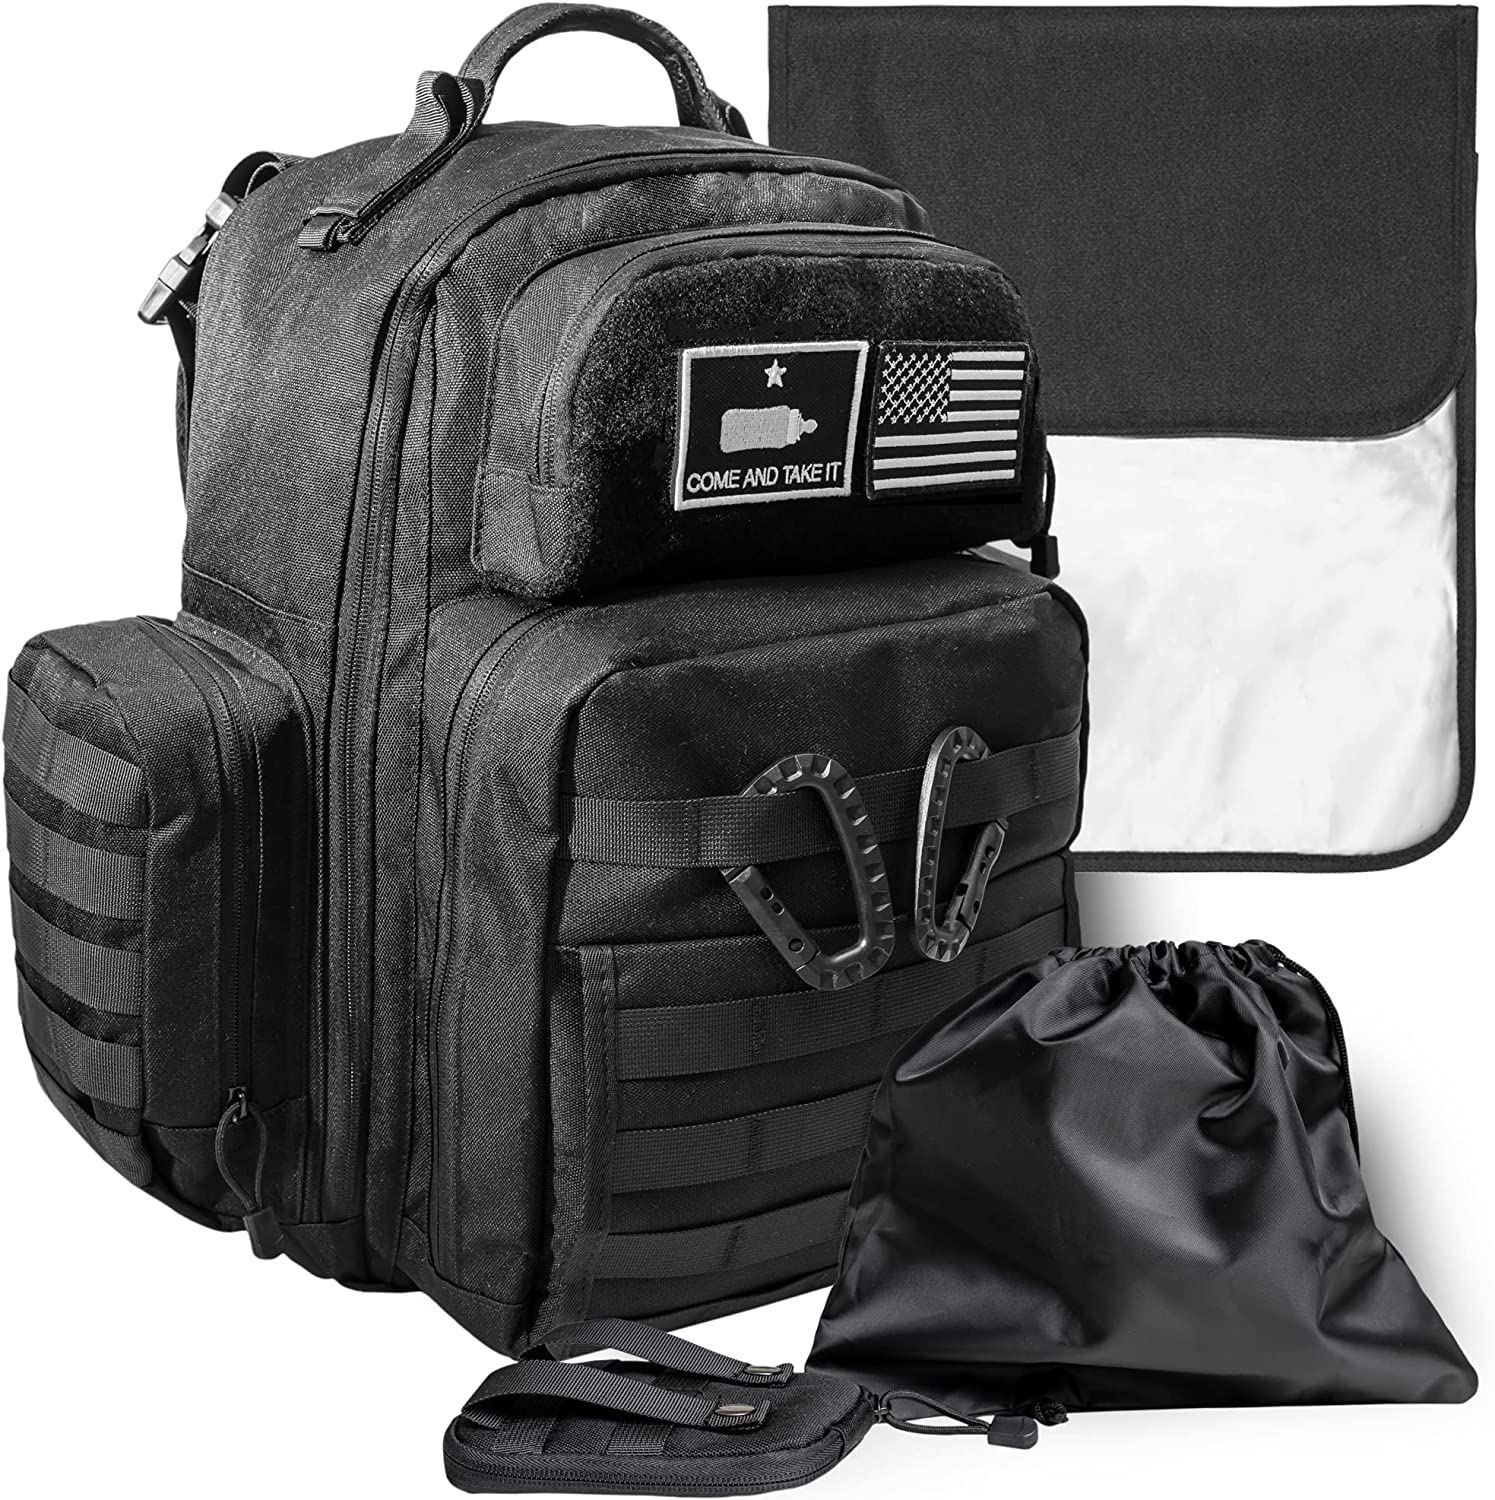 Dad Diaper Bag – Molle-Style Military Diaper Backpack Made of Rugged 900D Waterproof Polyester with Wider Extra-Long Straps, Pouch for Dirty Diapers, Baby Wipes Dispenser & Insulated Bottle Pockets